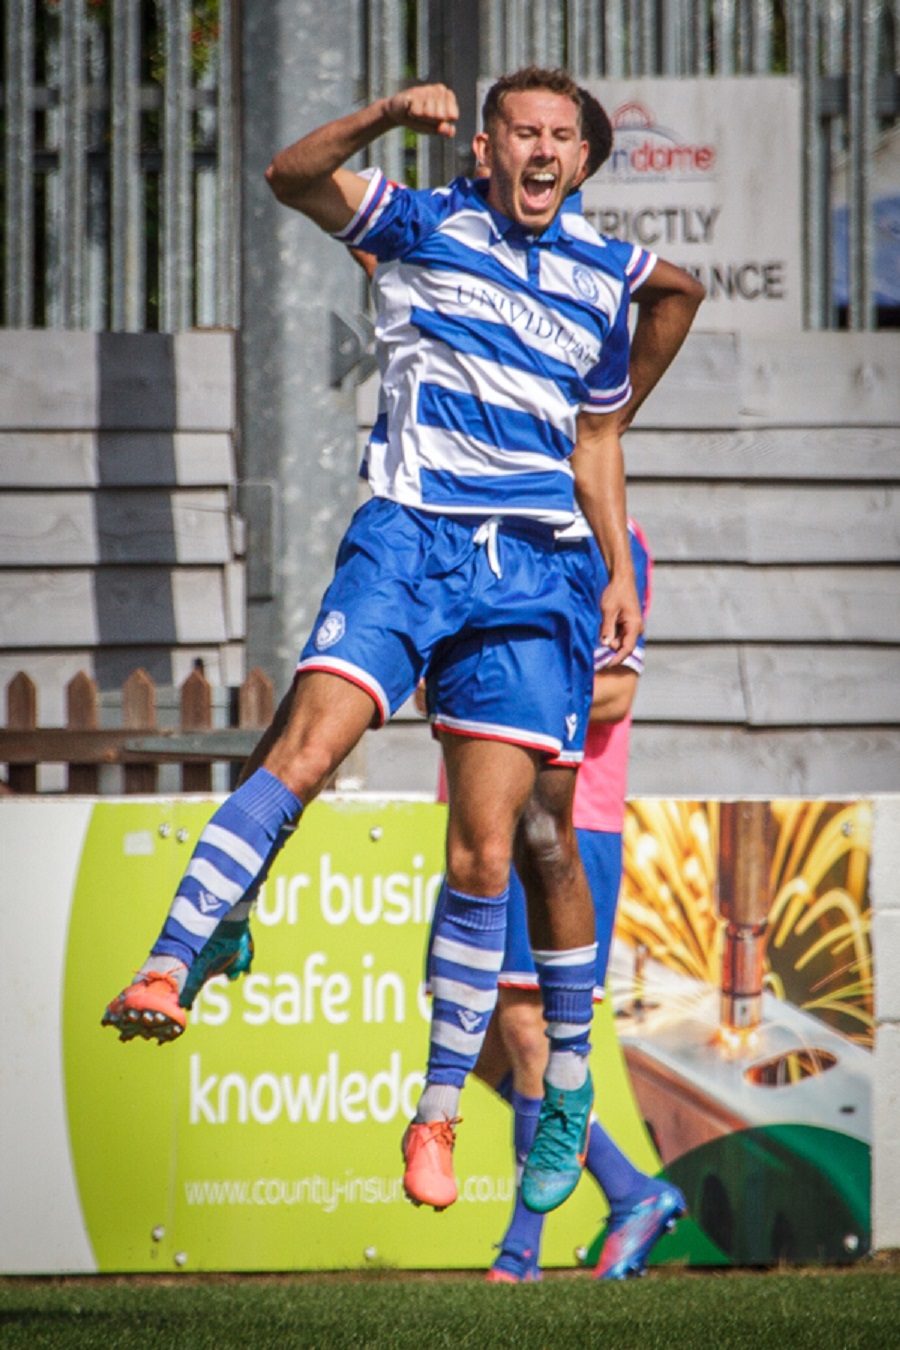 Harry Williams celebrates his first goal when we last met in August